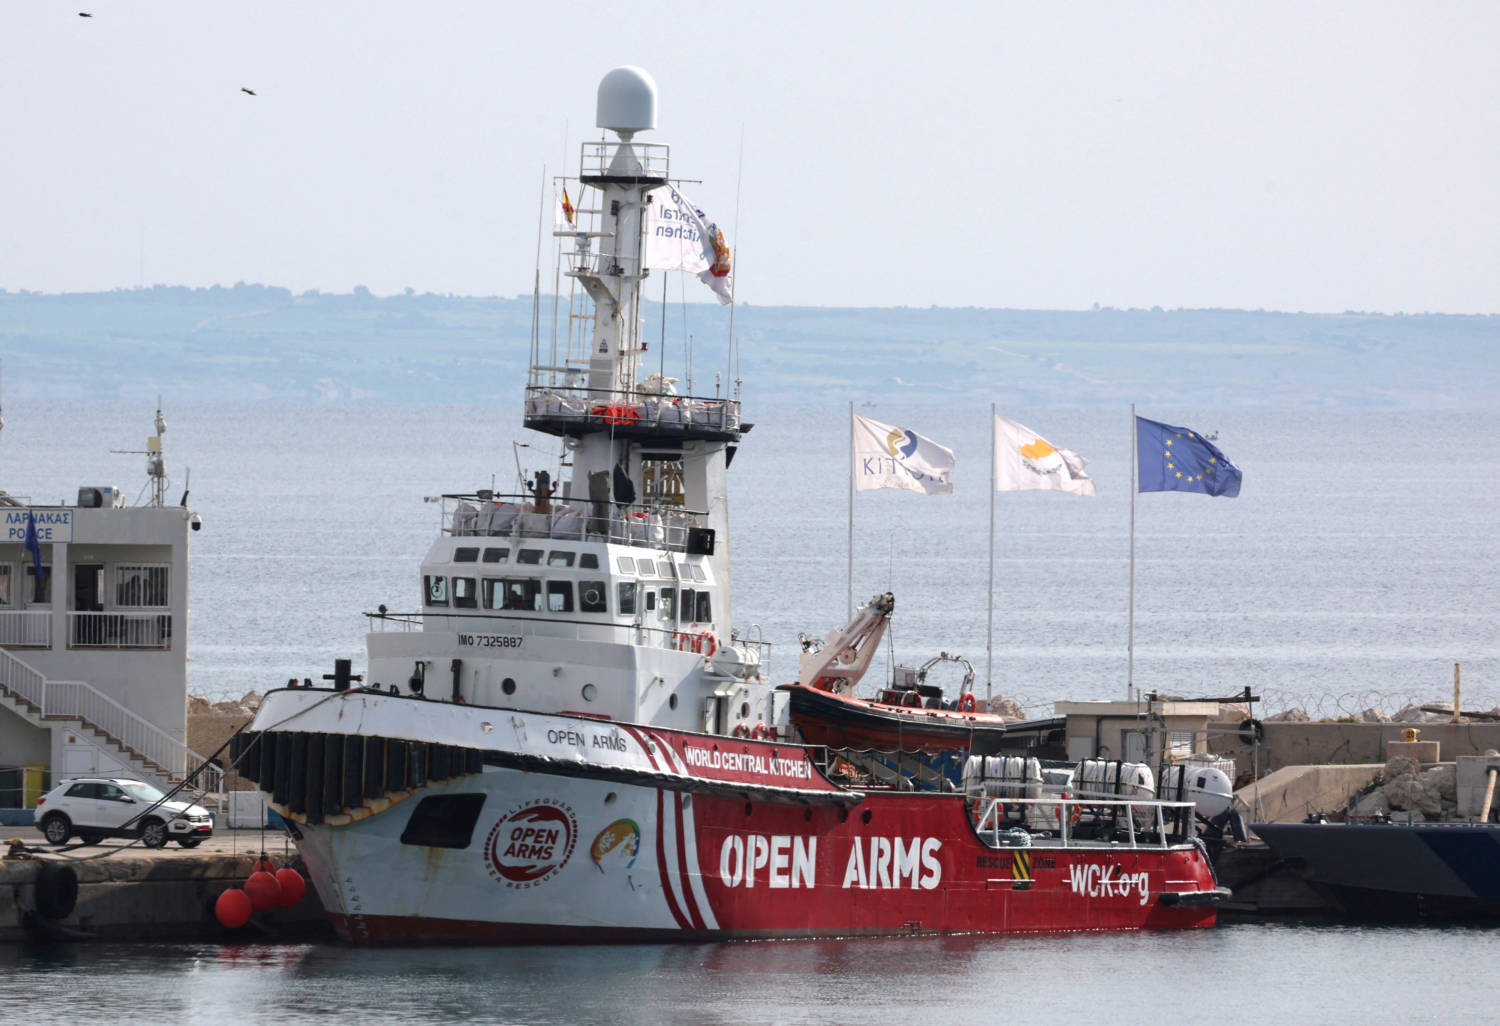 A Rescue Vessel Of The Spanish Ngo Open Arms Is Seen At The Port Of Larnaca